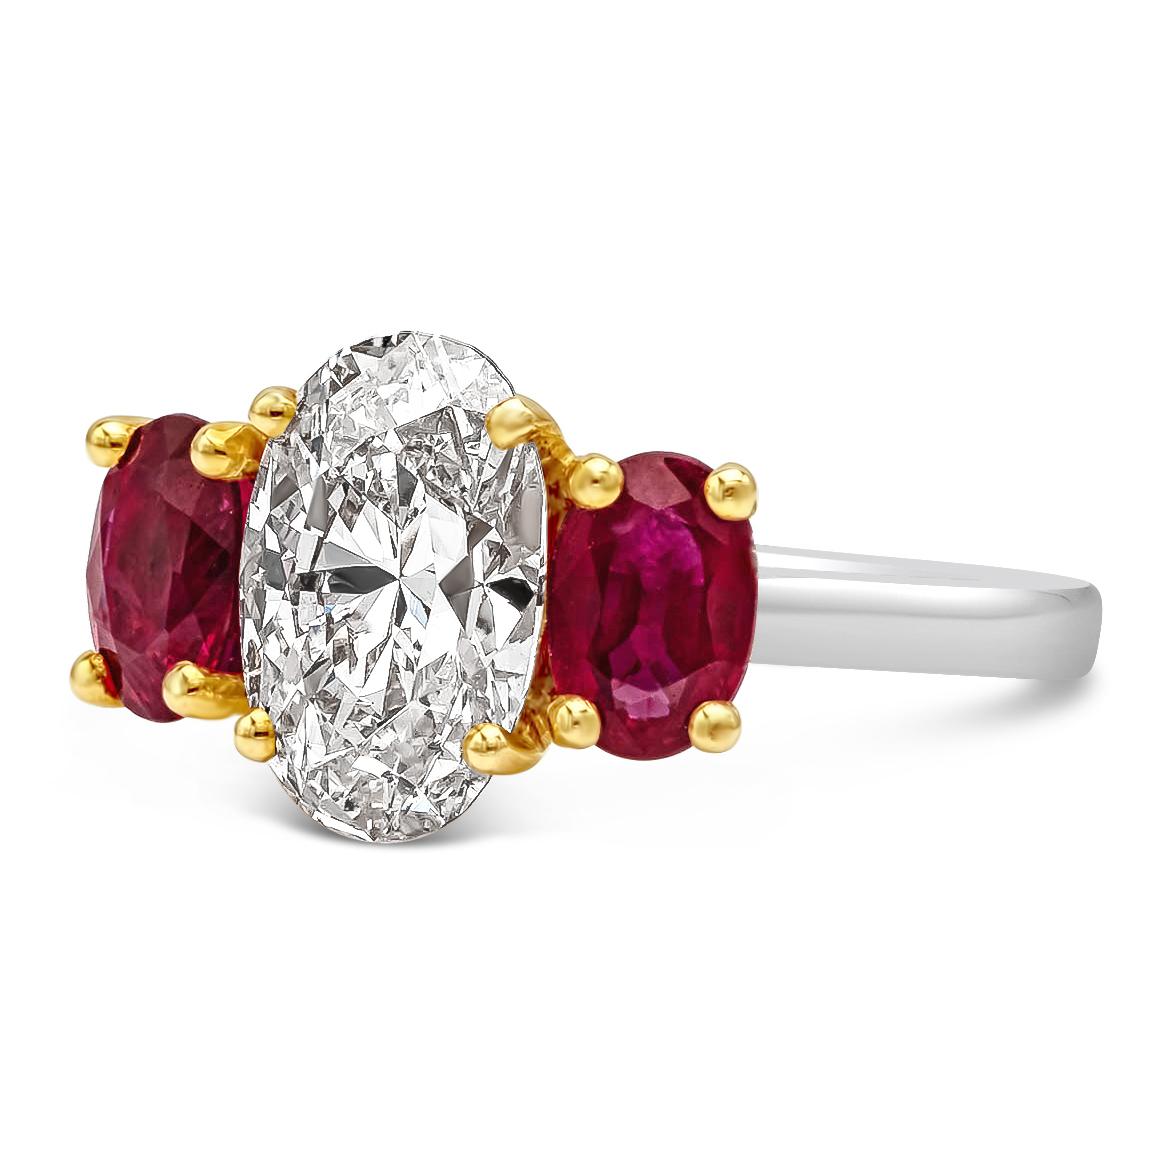 A vibrant and colorful engagement ring that features a 1.81 carats oval cut diamond elegantly flanked by oval cut rubies. The diamonds and rubies are set on a 4 prong yellow gold basket attached to a 18k white gold shank. Rubies weigh 1.41 carats